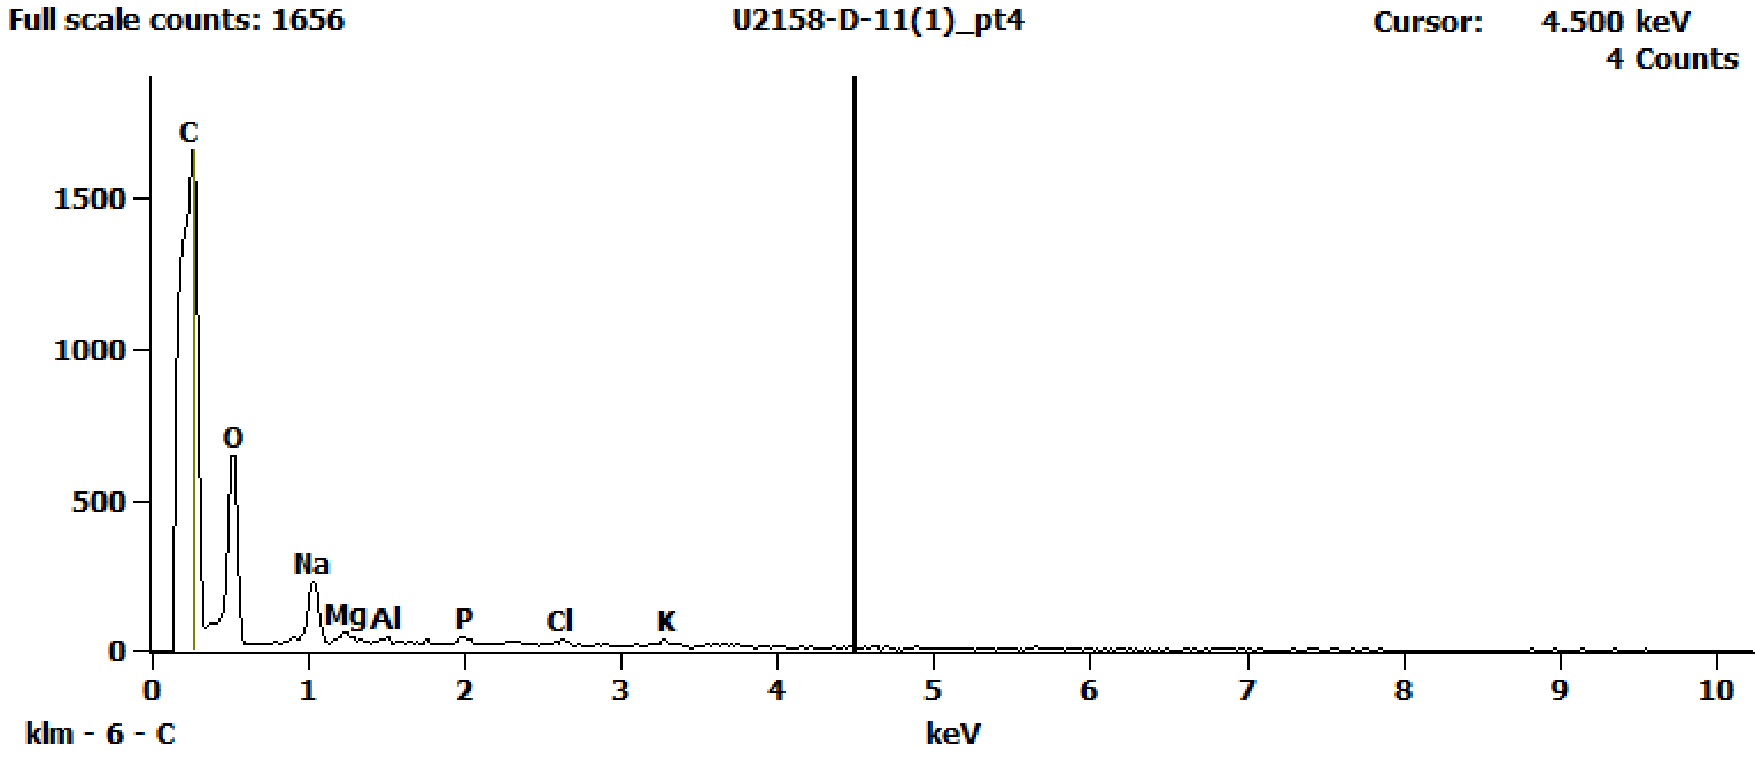 EDS Spectra for sample U2158-D-11 taken at test area 4. The test area is labeled in the particle SEM photo.